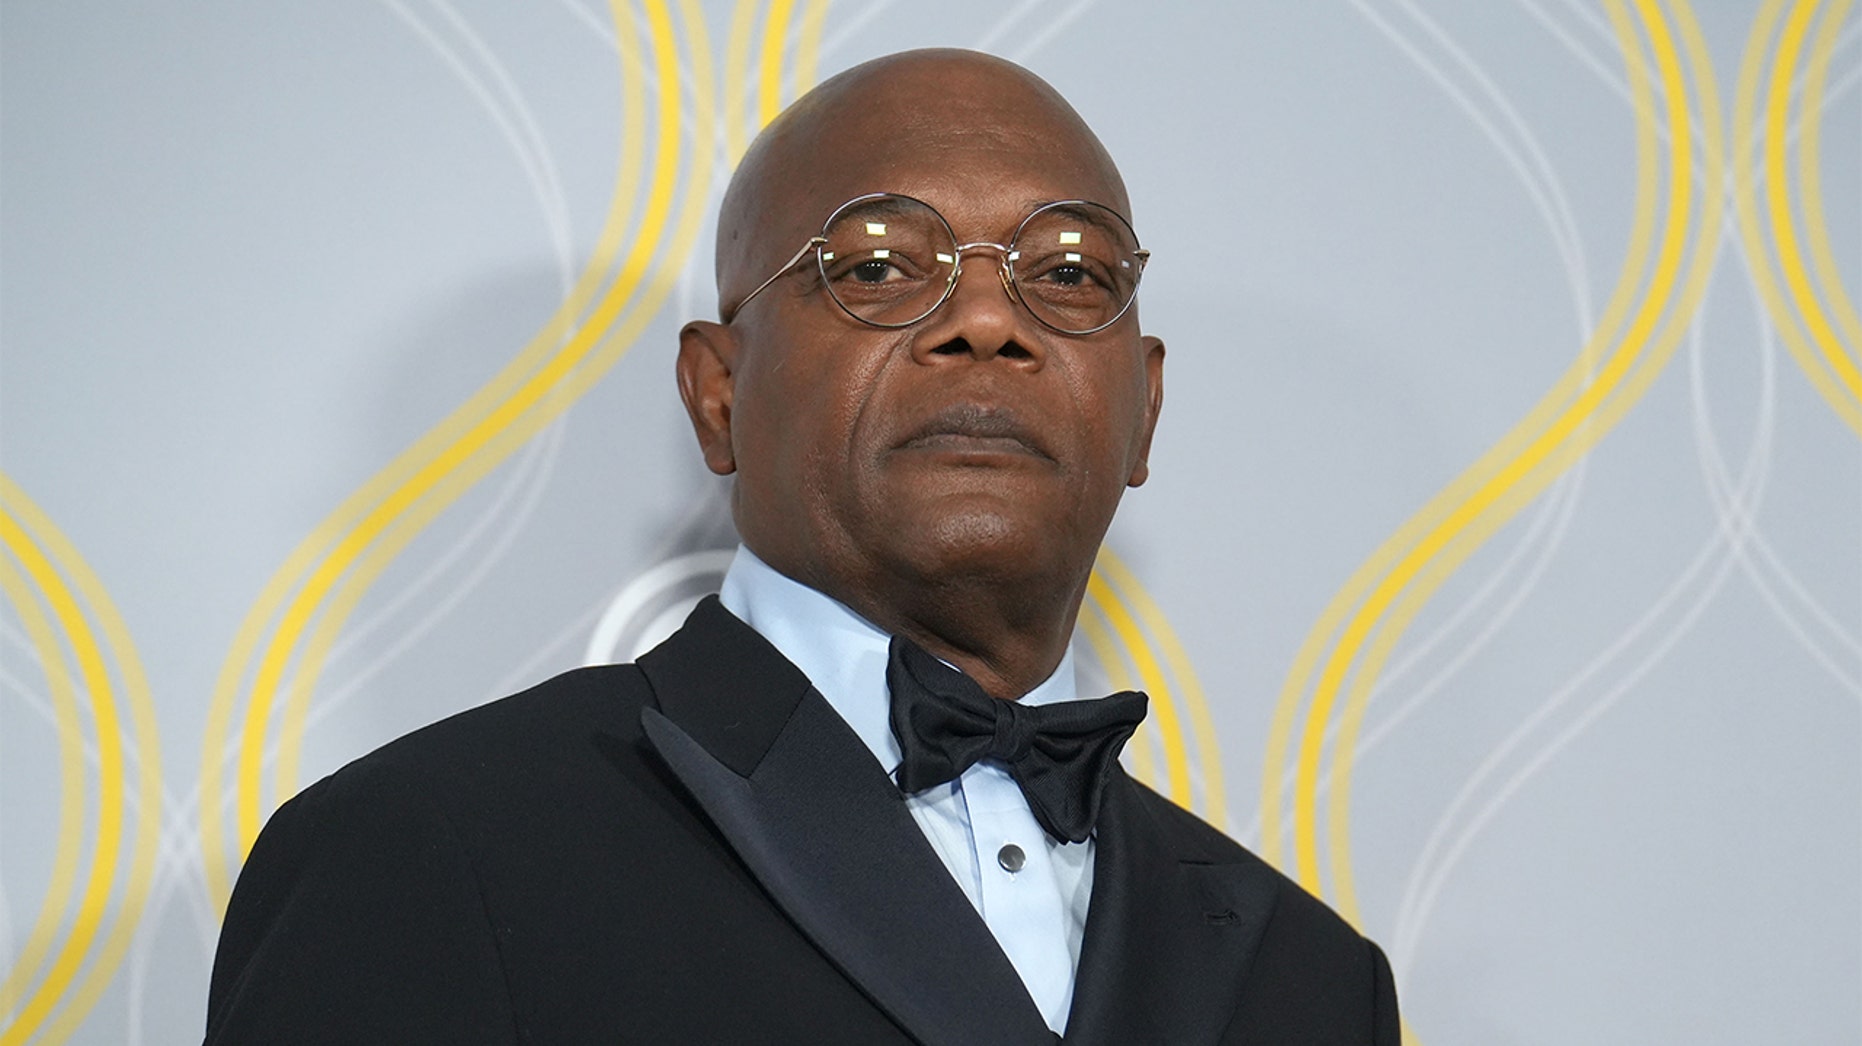 Samuel L. Jackson rips 'Uncle Clarence' Thomas in racial attack on Supreme Court justice